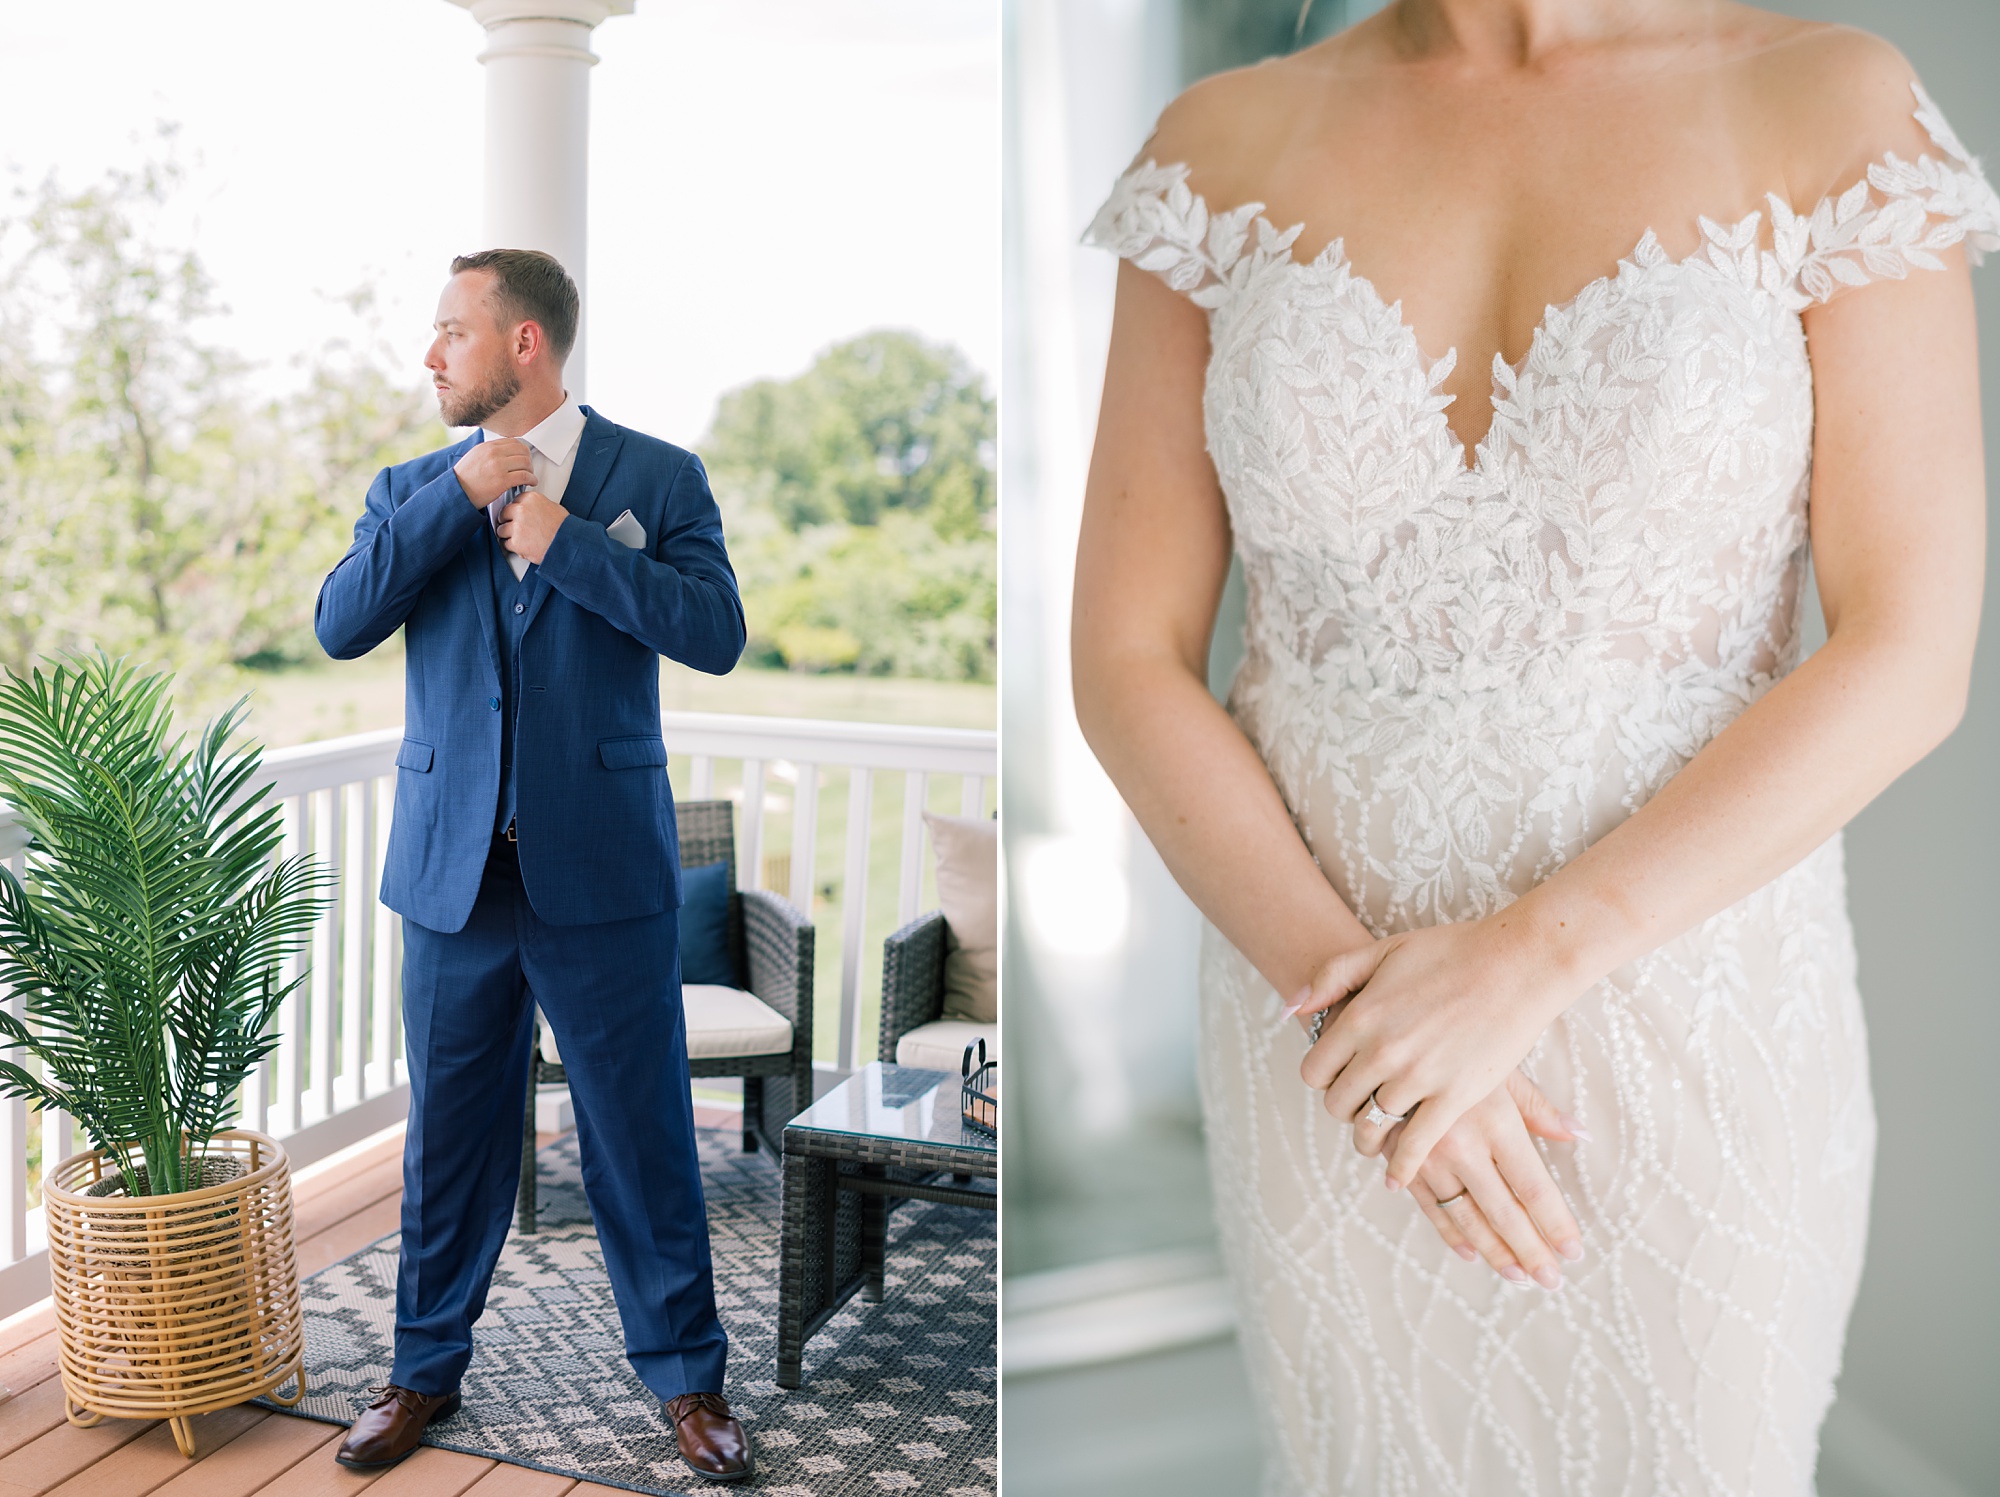 groom stands on patio at the Pavilion at Weatherly adjusting tie and bride shows off off-the-shoulder lace gown